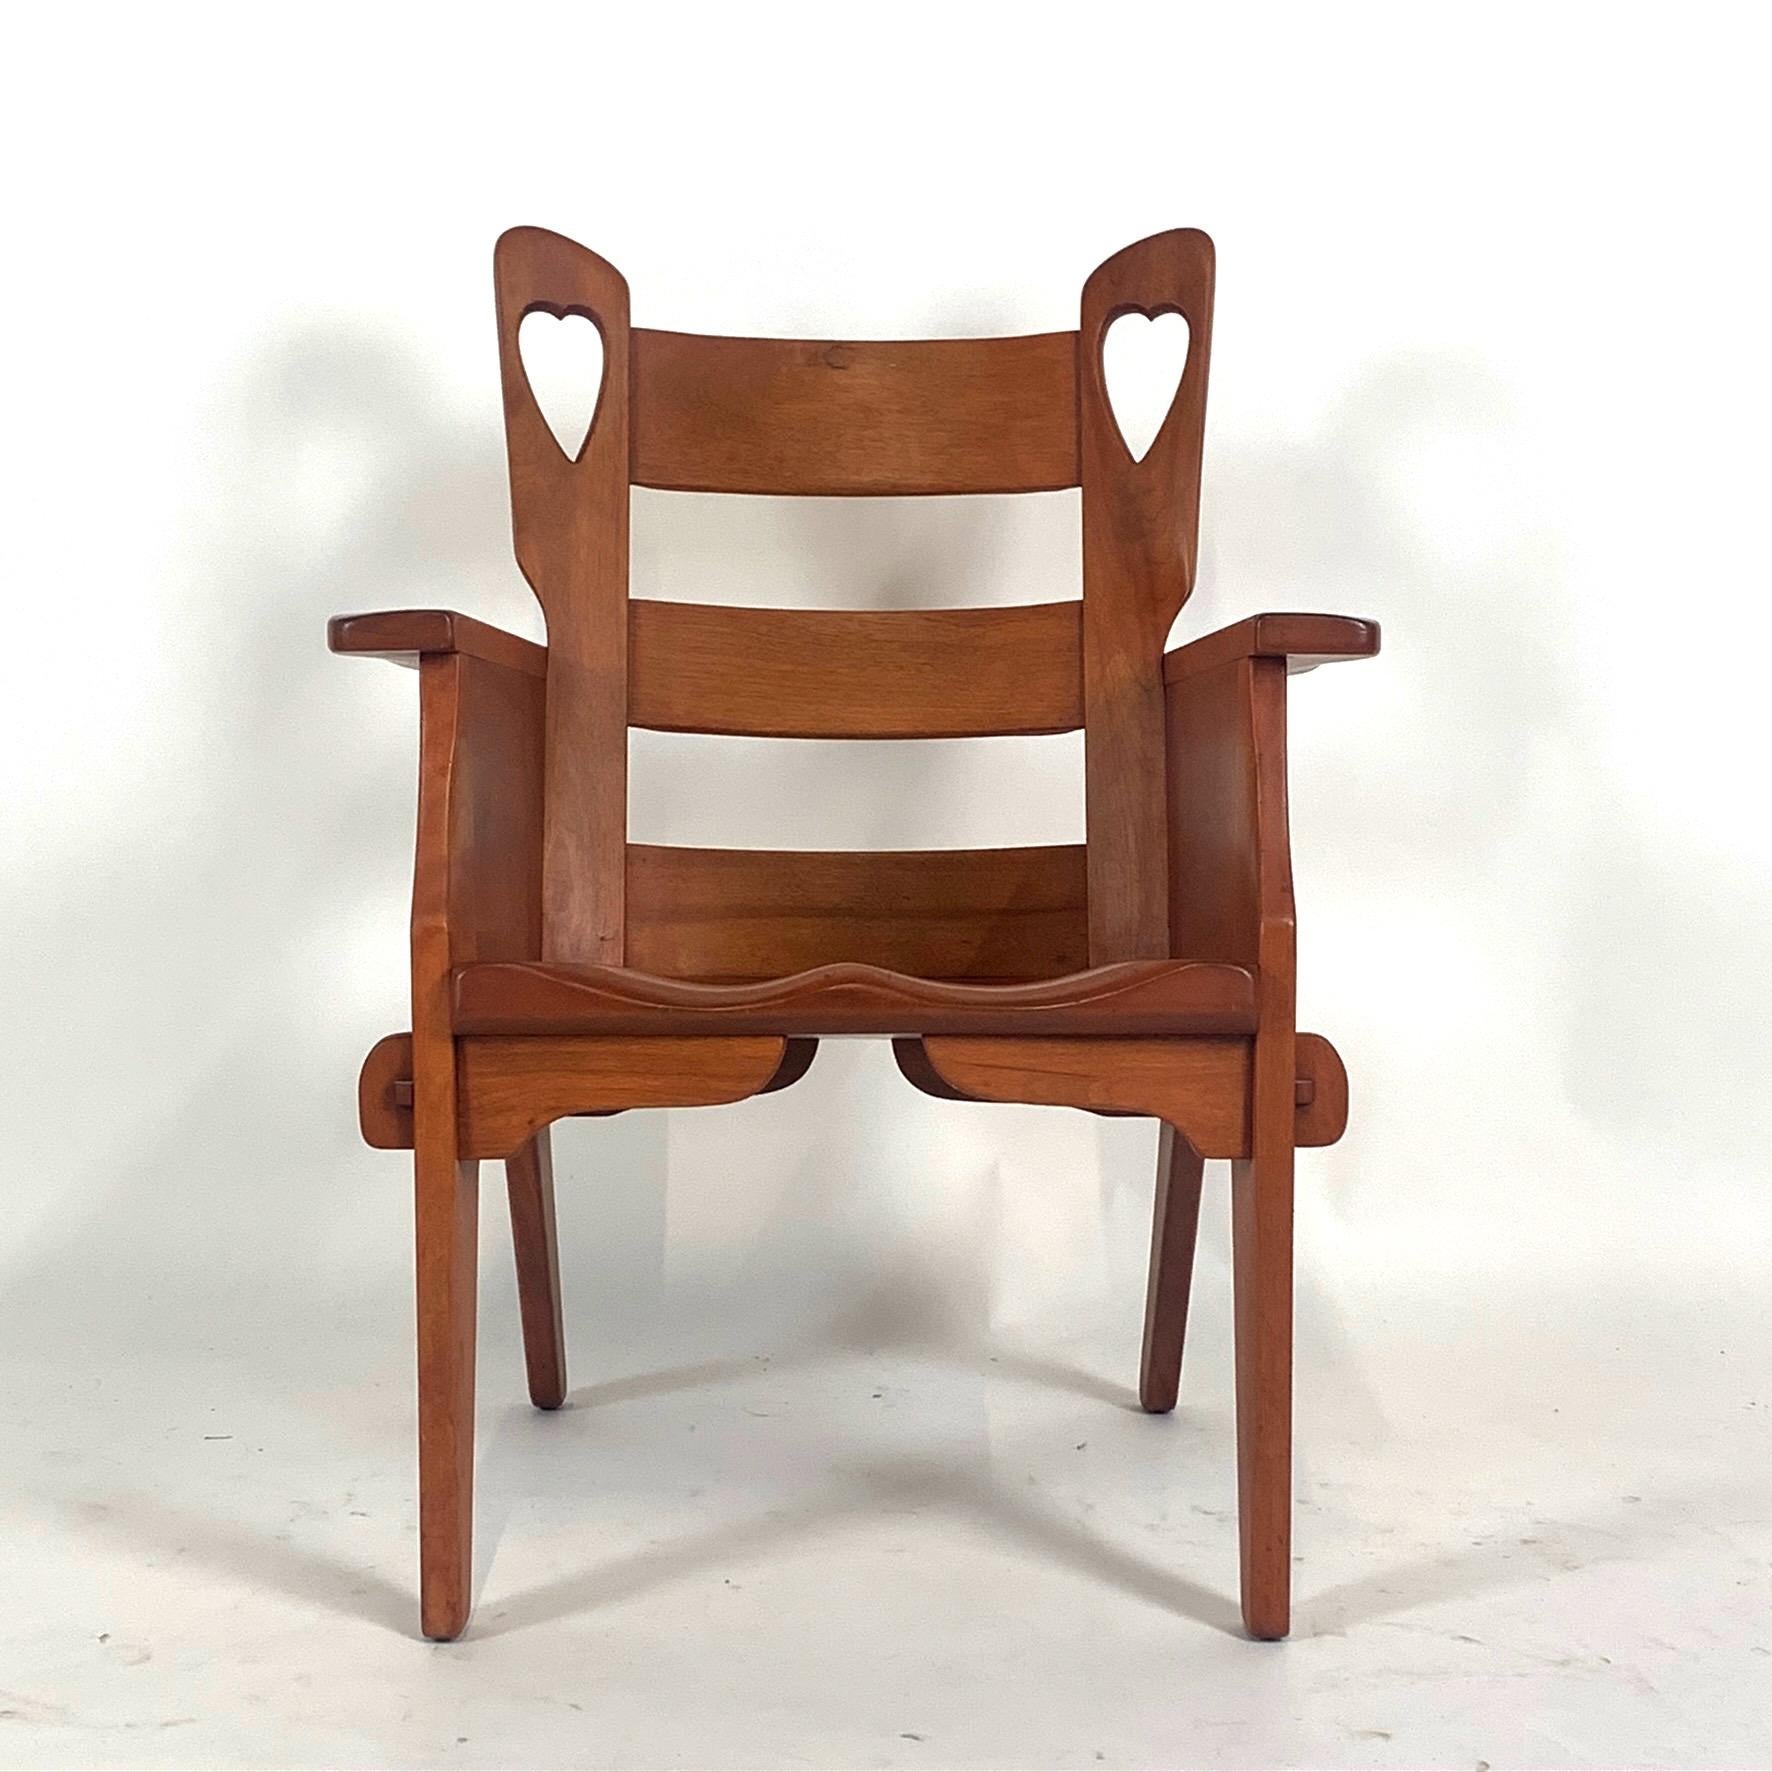 Excellent condition well documented Cushman chair with heart cutout, carved seat, and wedged mortise and Tenon construction. This is an excellent example of a rare Cushman chair.